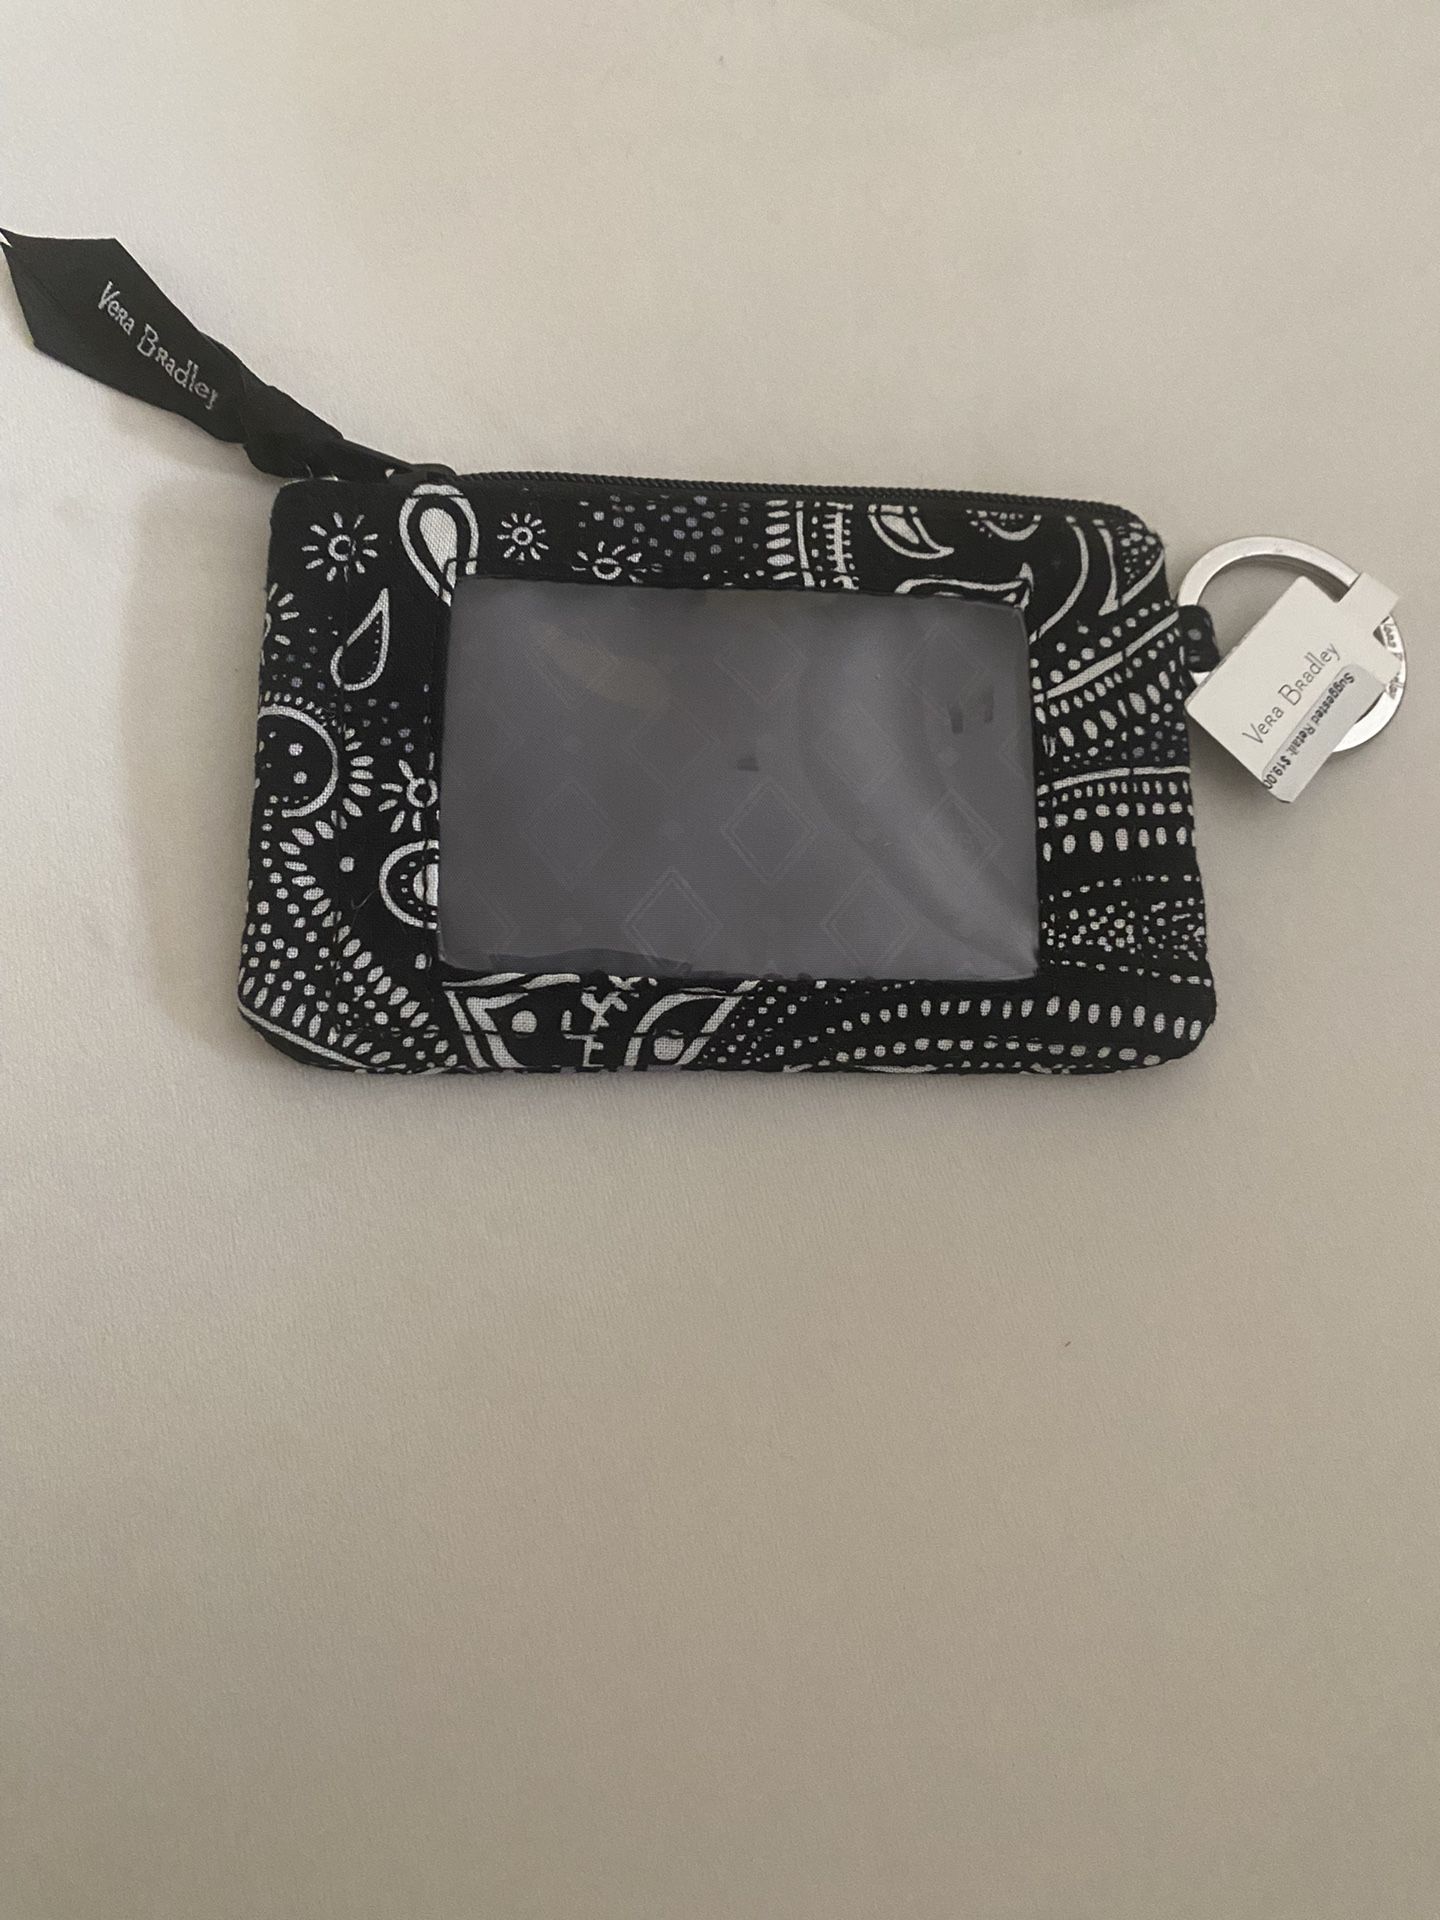 A Small Black Wallet With White Designs